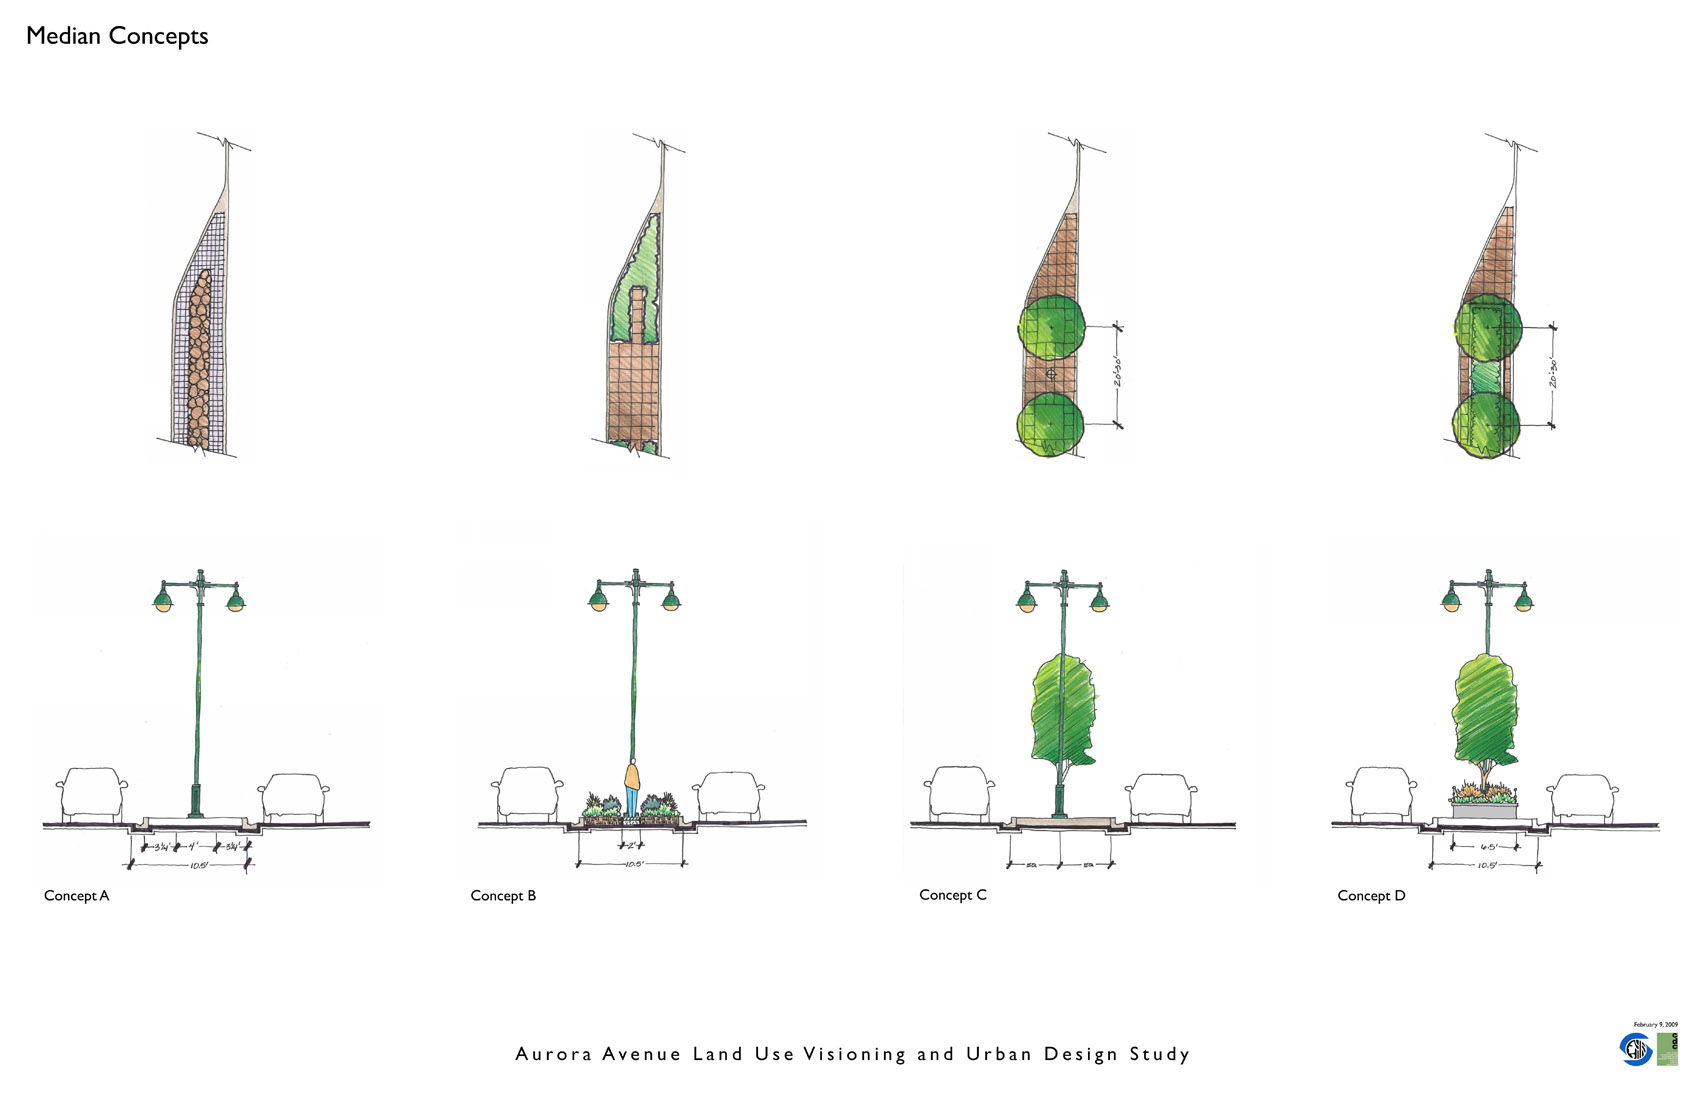 Seattle’s Planning Department studied a planted median for Aurora in 2009 providing four varying options of execution. (Image from 2009 Visioning Plan)